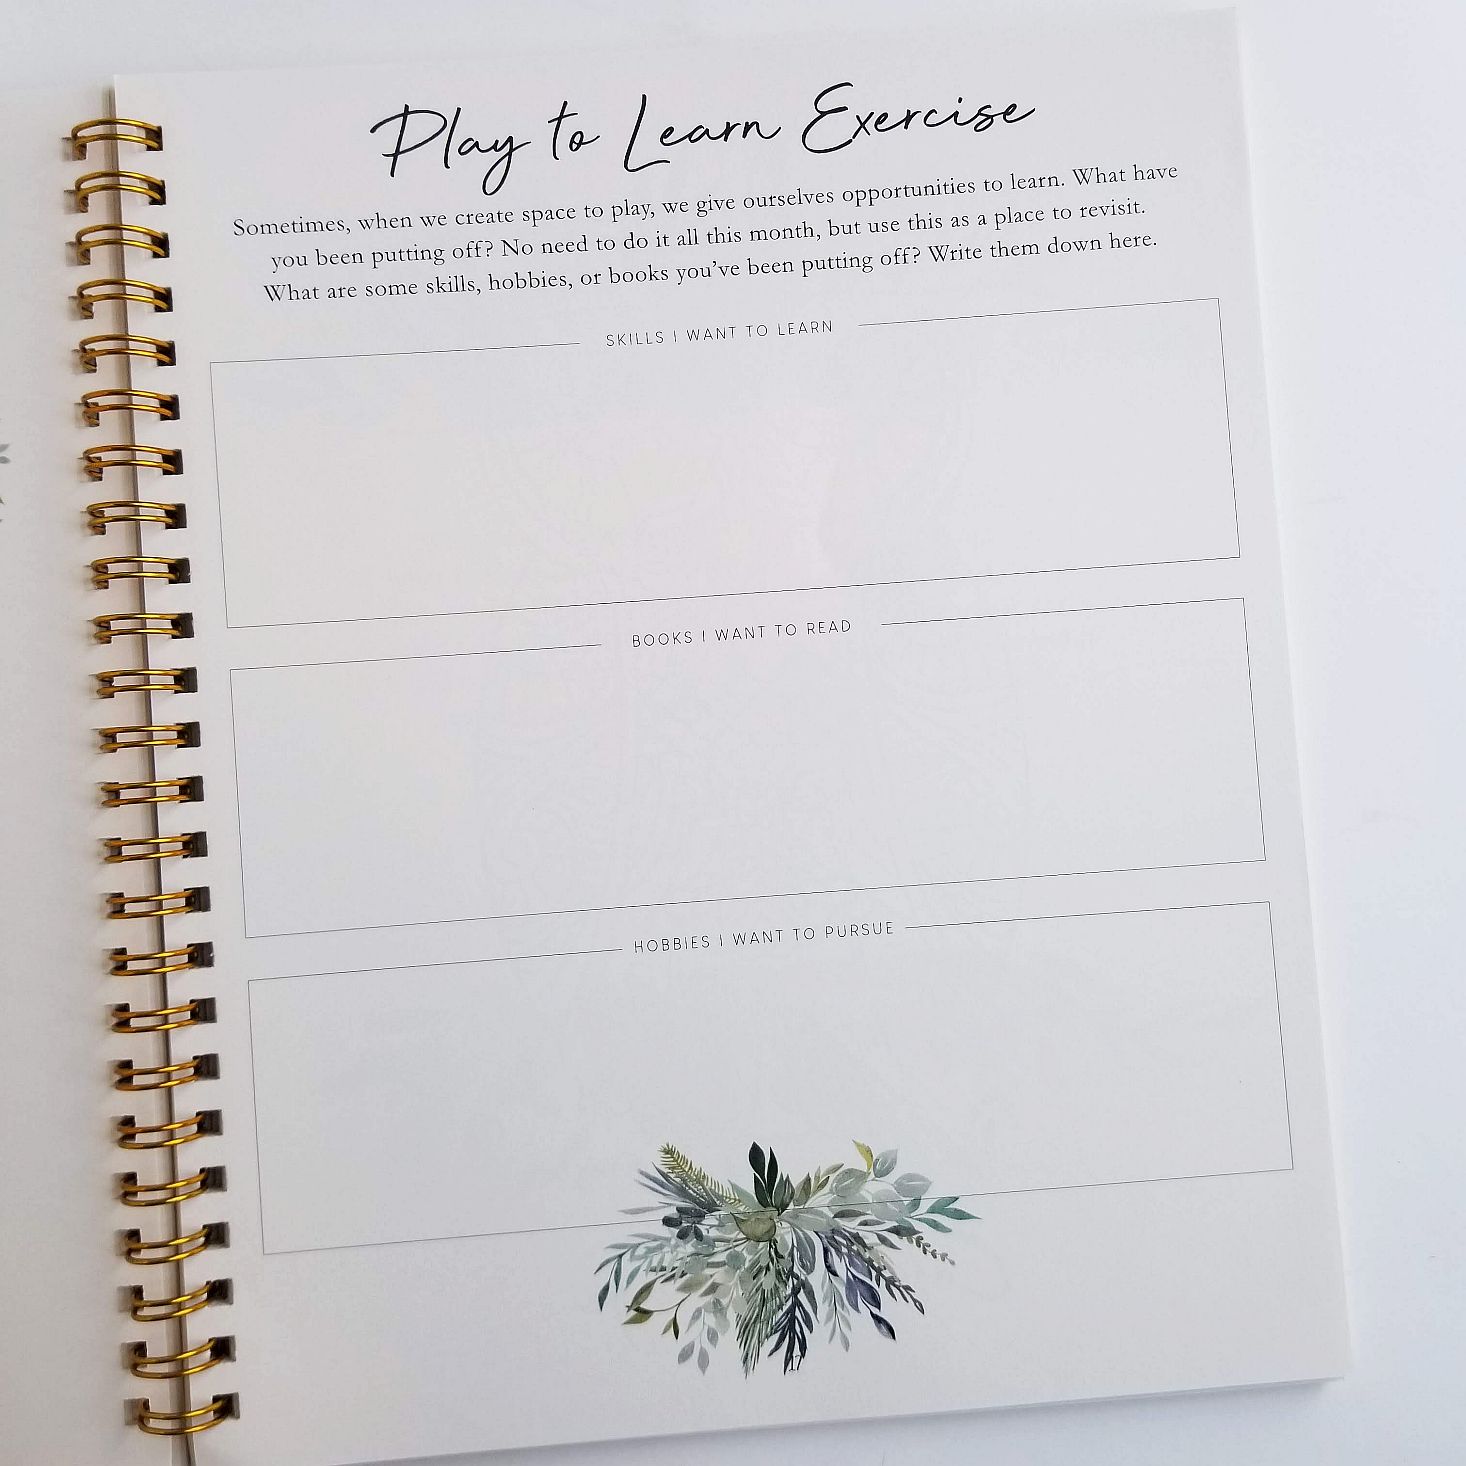 Silk + Sonder Planner March 2020 play + learn exercises